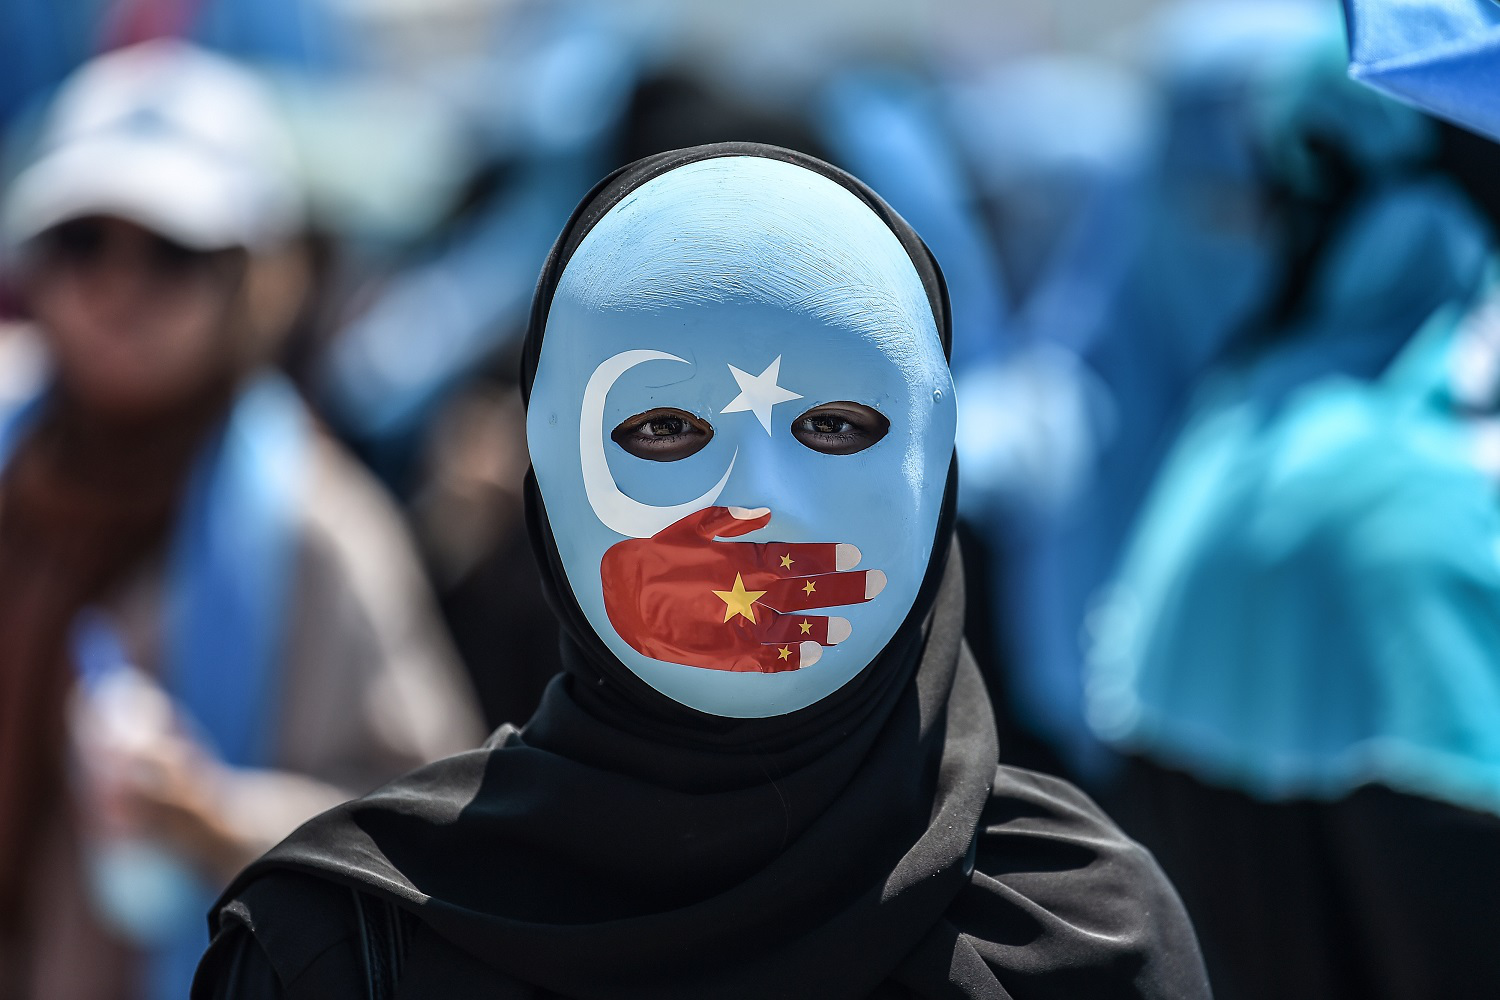 Thousands of Uighur have been detained without trial in China